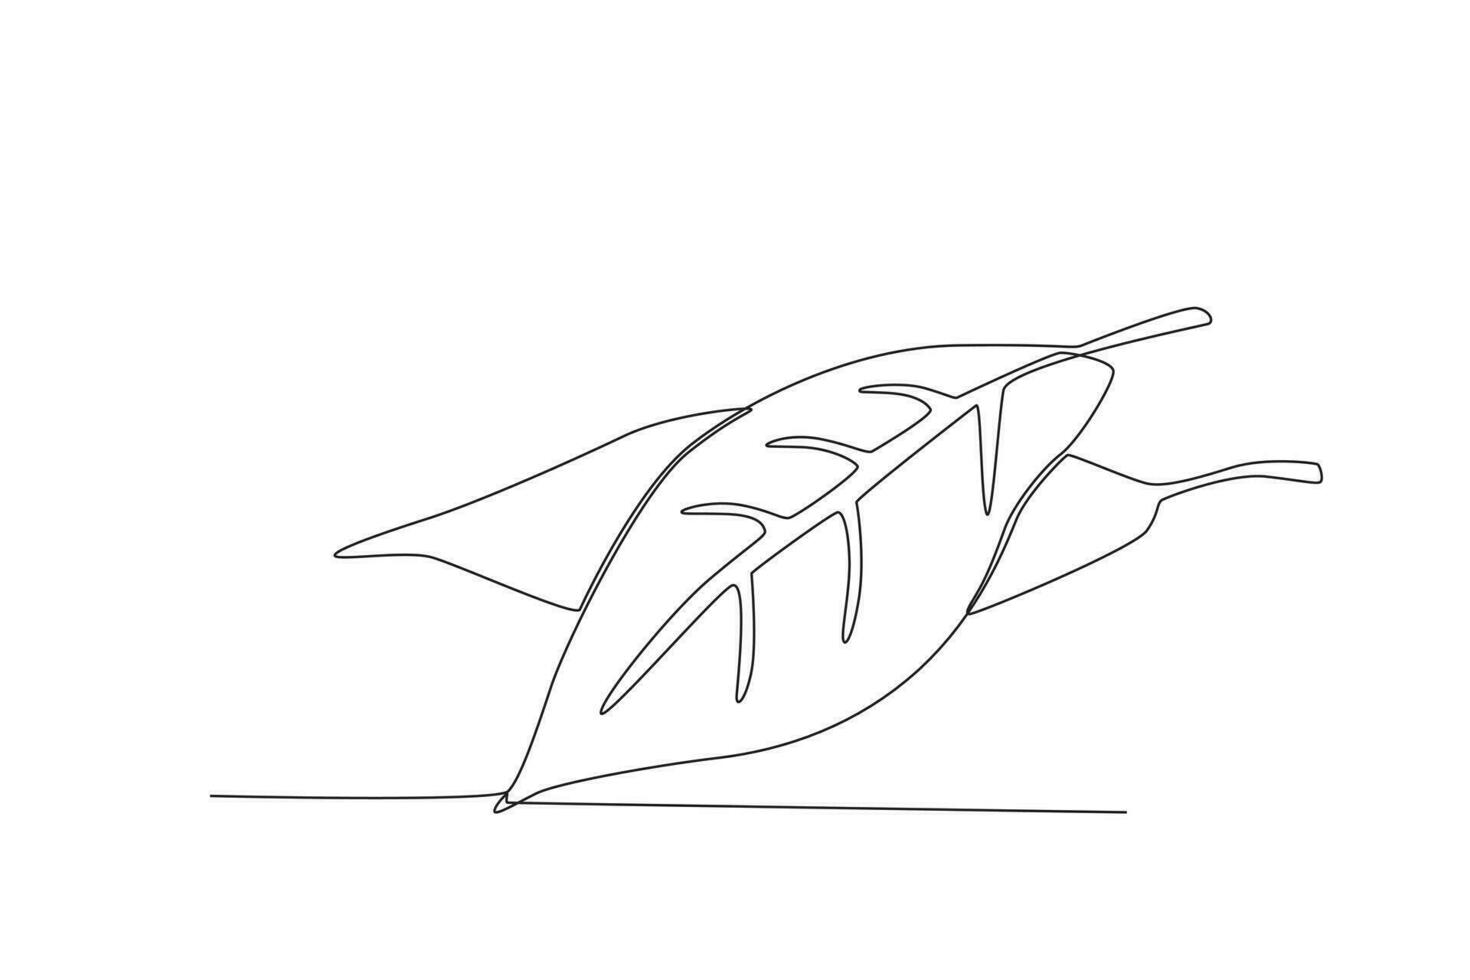 Single one line drawing bay leaf vegetable concept continuous line draw design graphic vector illustration